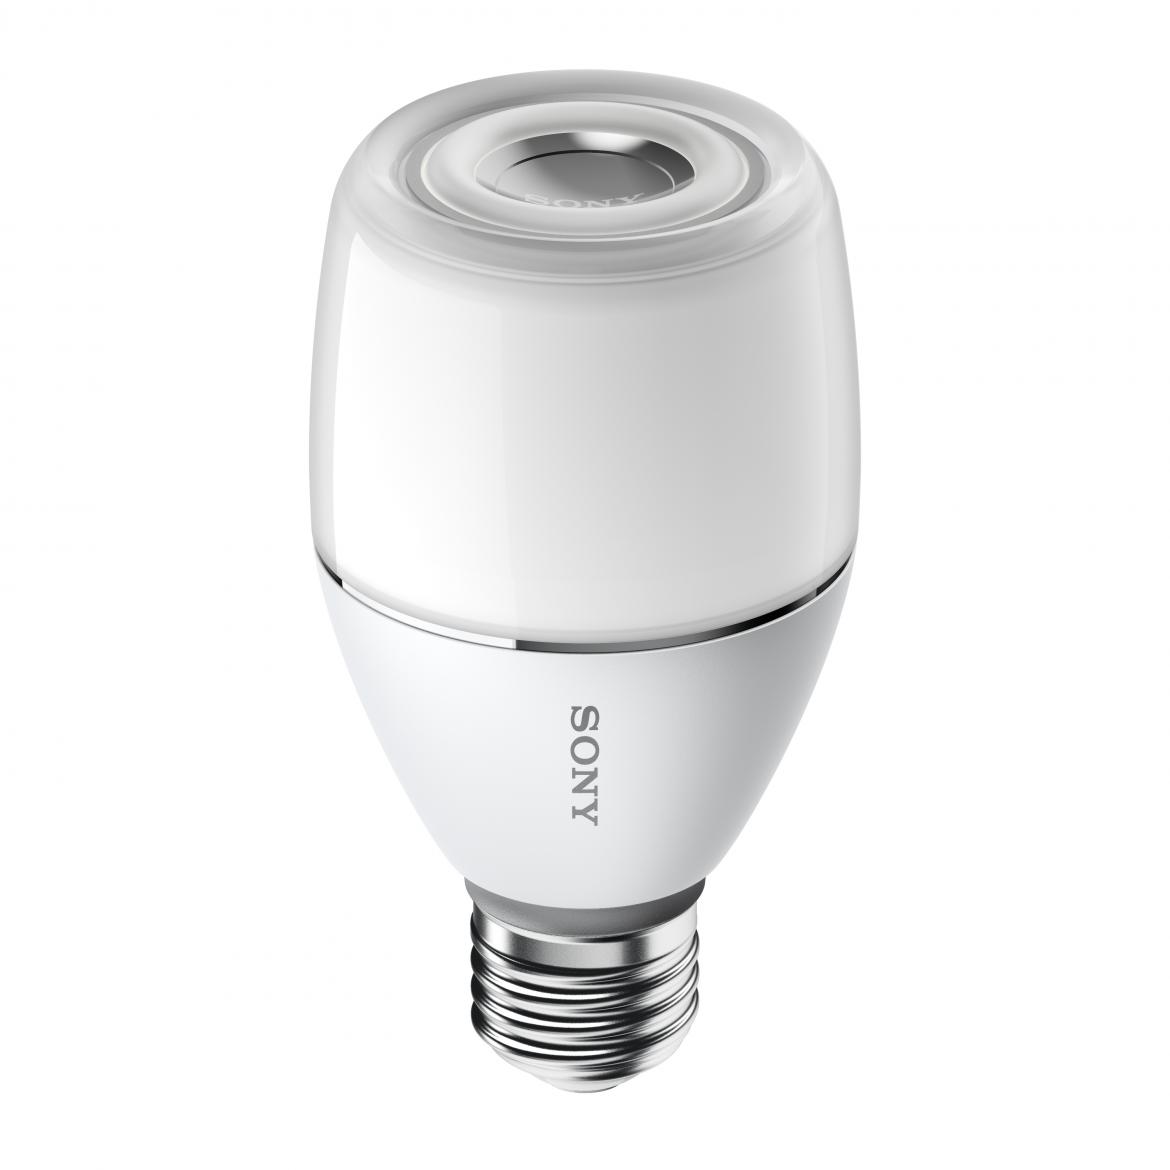 The brand’s new product blends light and sound into one unit. Measuring about the size of a typical light bulb, it plugs into any standard socket and can be connected to a smartphone or tablet via Bluetooth, allowing users to adjust sound and light settings from anywhere in the room. 